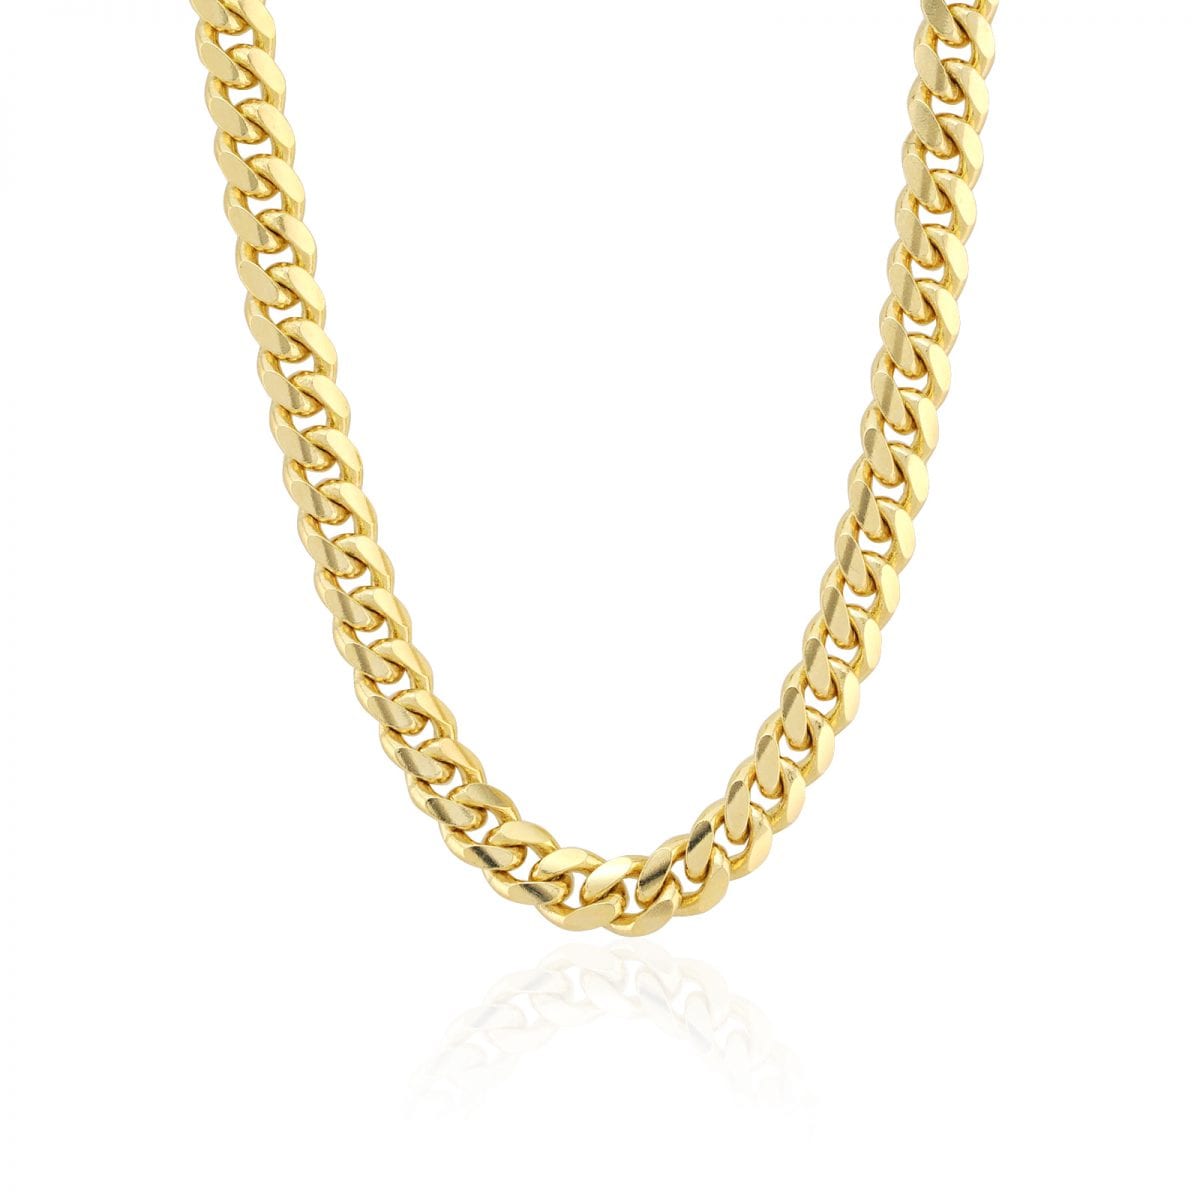 Solid 14k Yellow Gold 2-6mm Miami Cuban Chain Necklace 18"-28" - 4mm, 26"